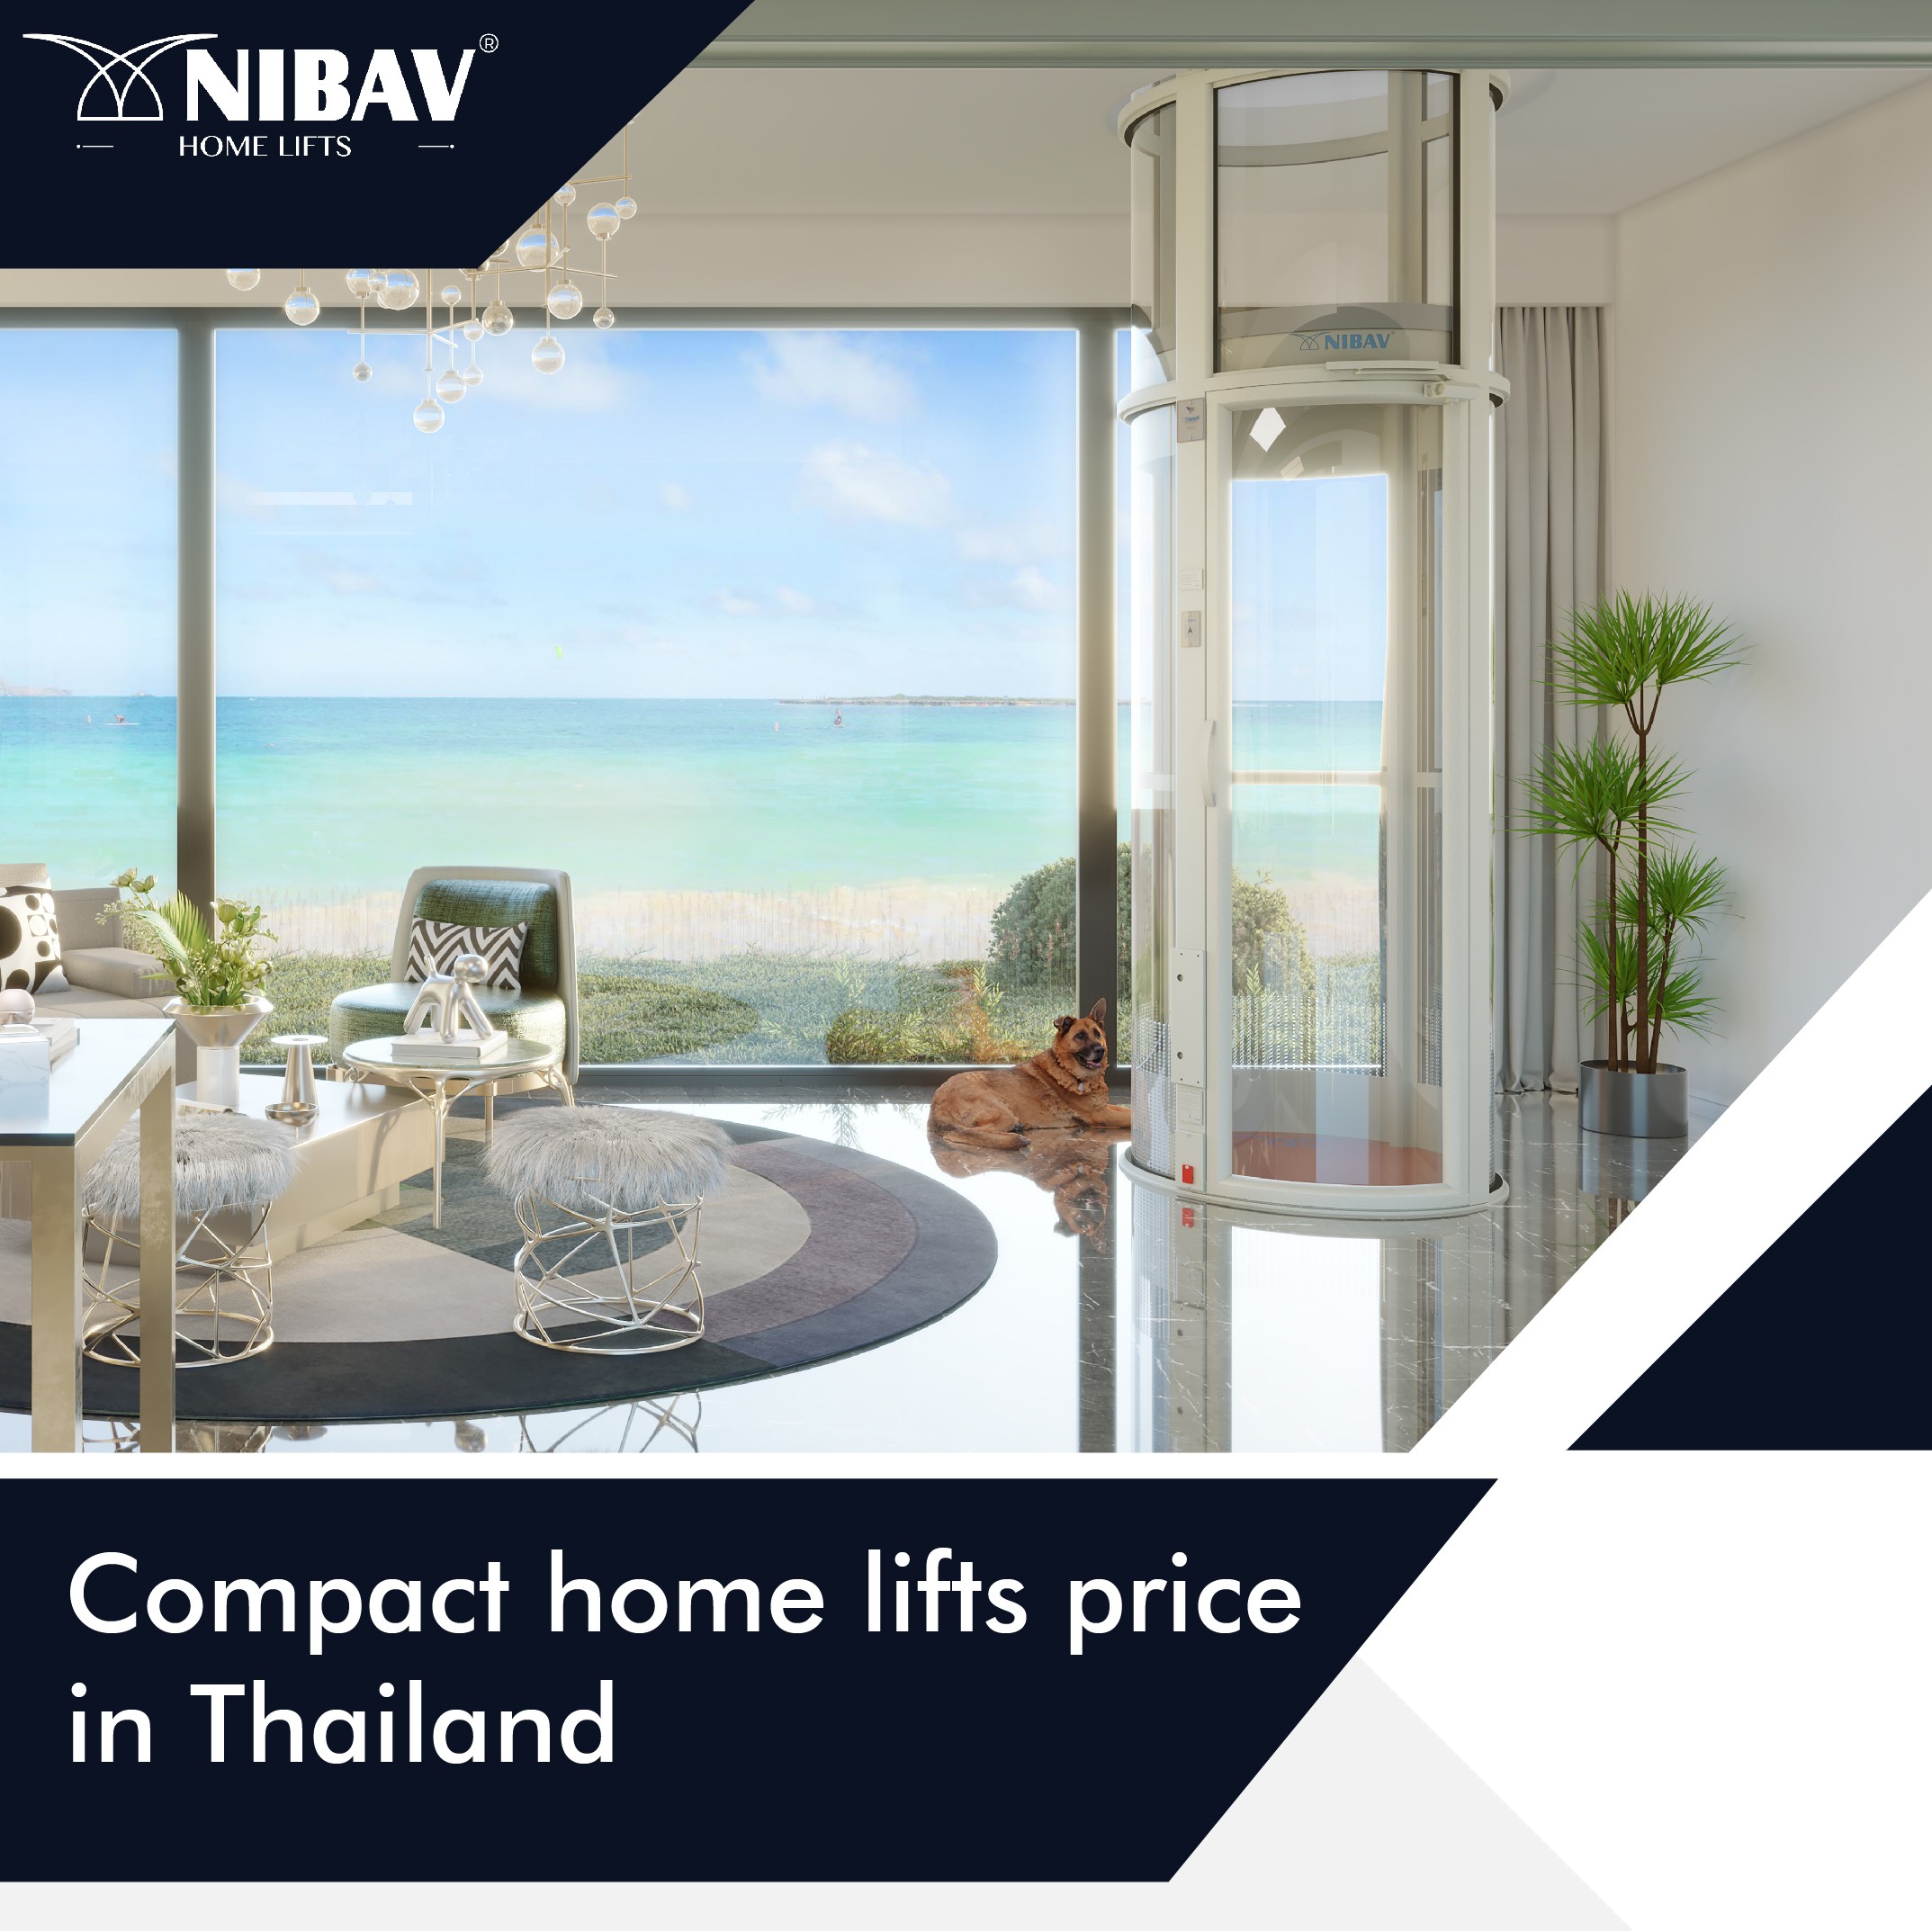 Compact home lifts price in Thailand